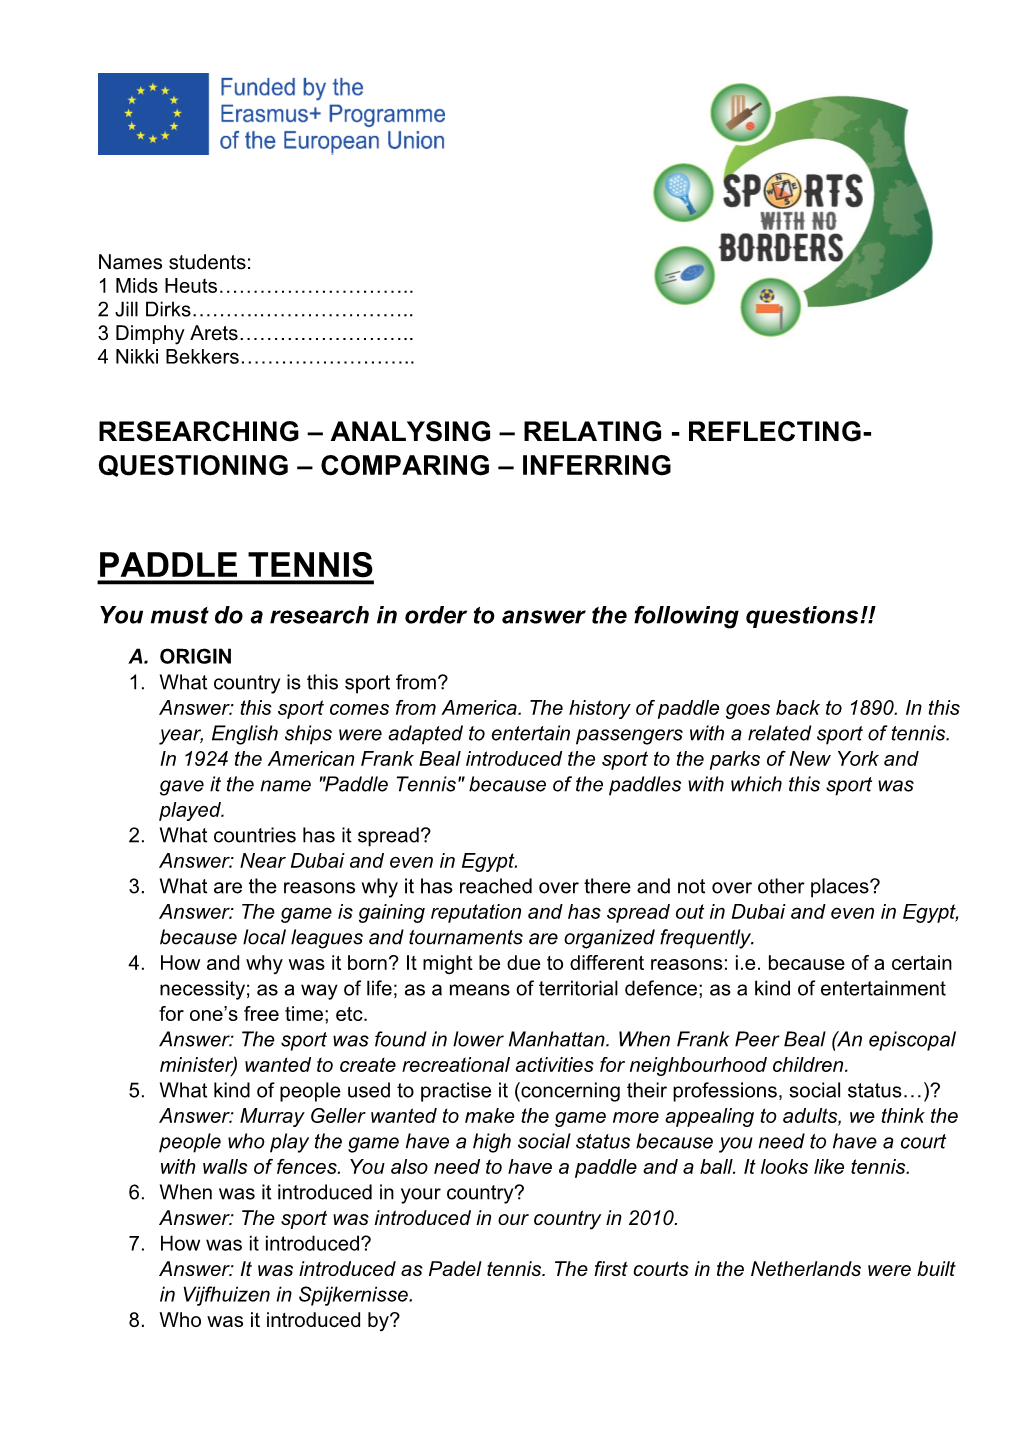 PADDLE TENNIS You Must Do a Research in Order to Answer the Following Questions!! A